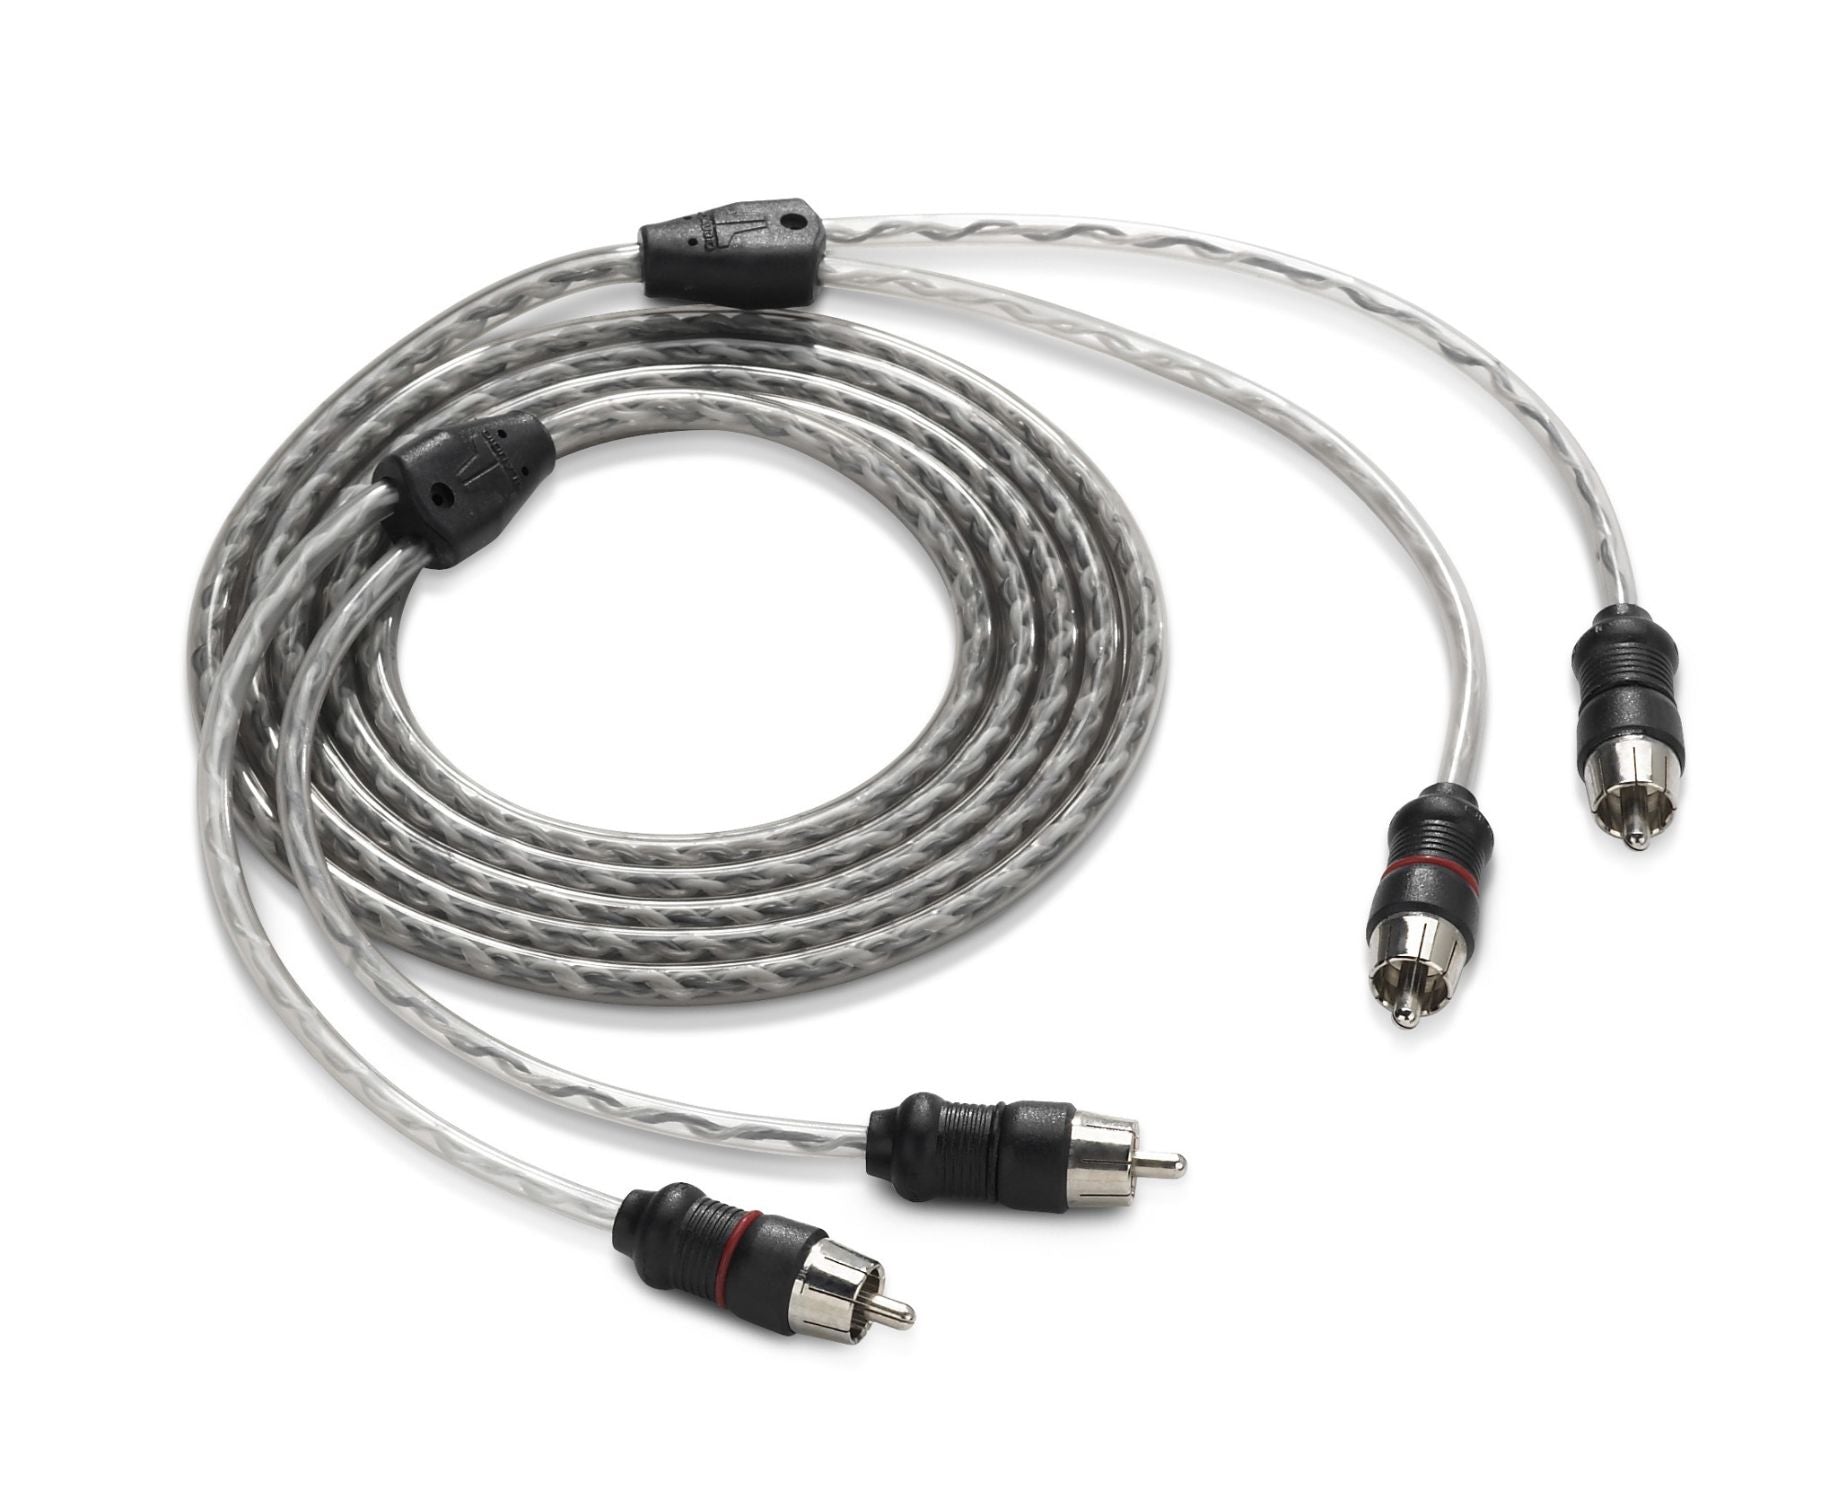 RSX Technologies Max Phono Cable - The Absolute Sound